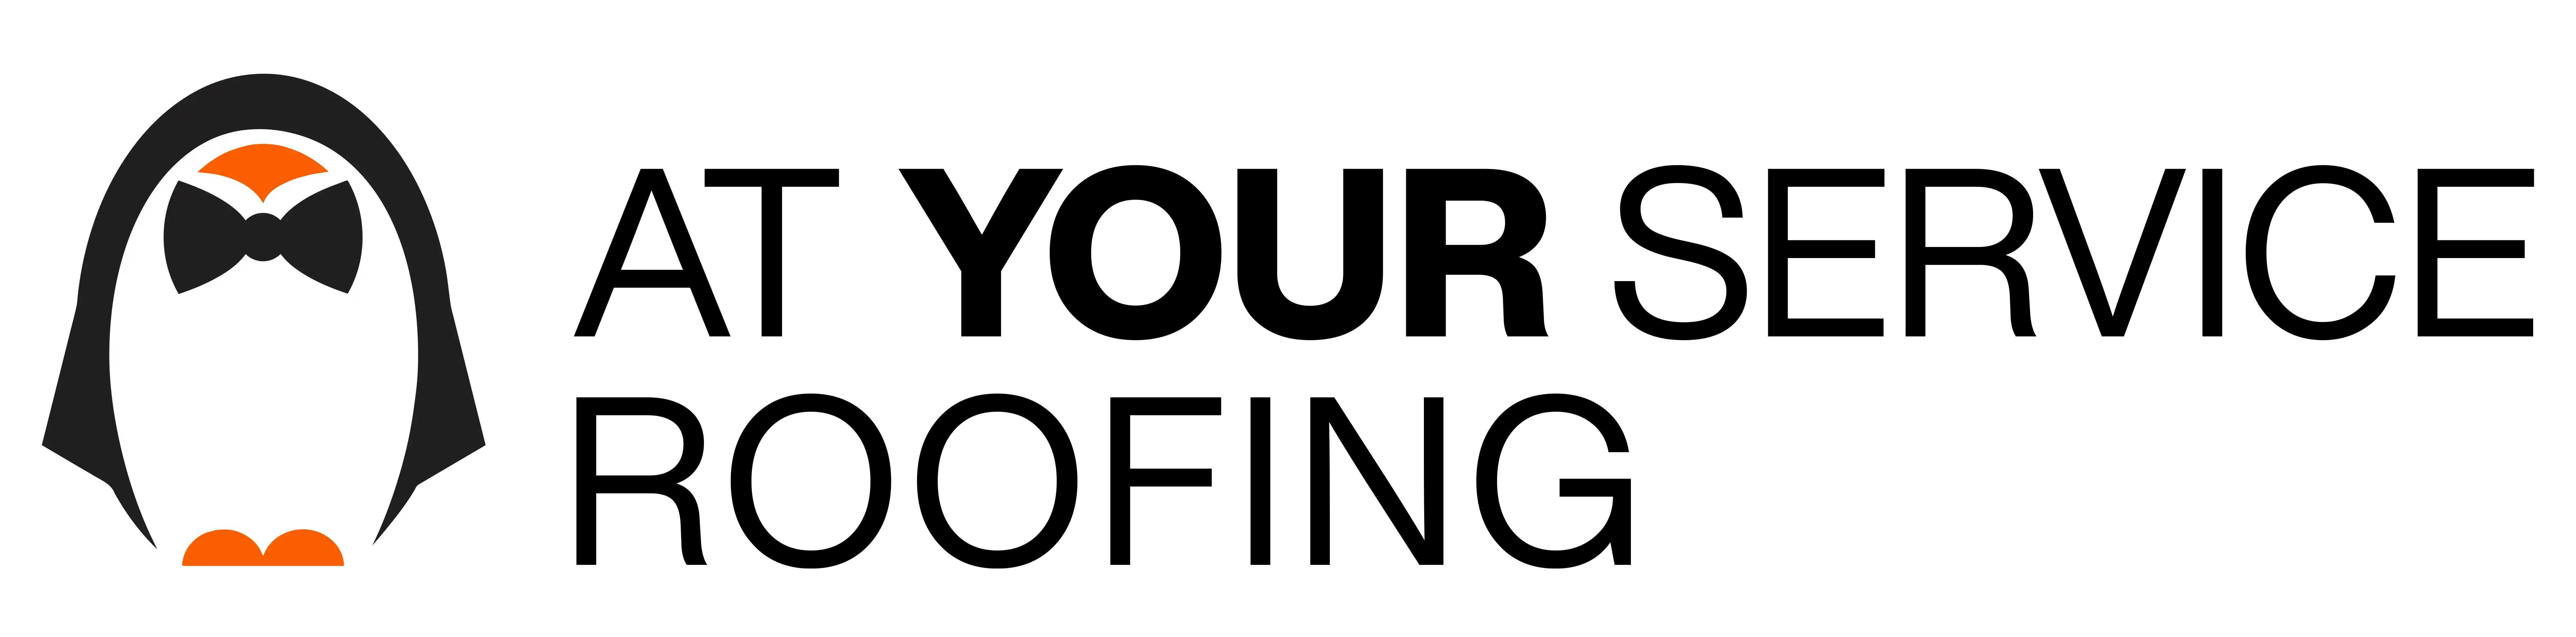 At Your Service Roofing Greater Cincinnati Area Local Roofers